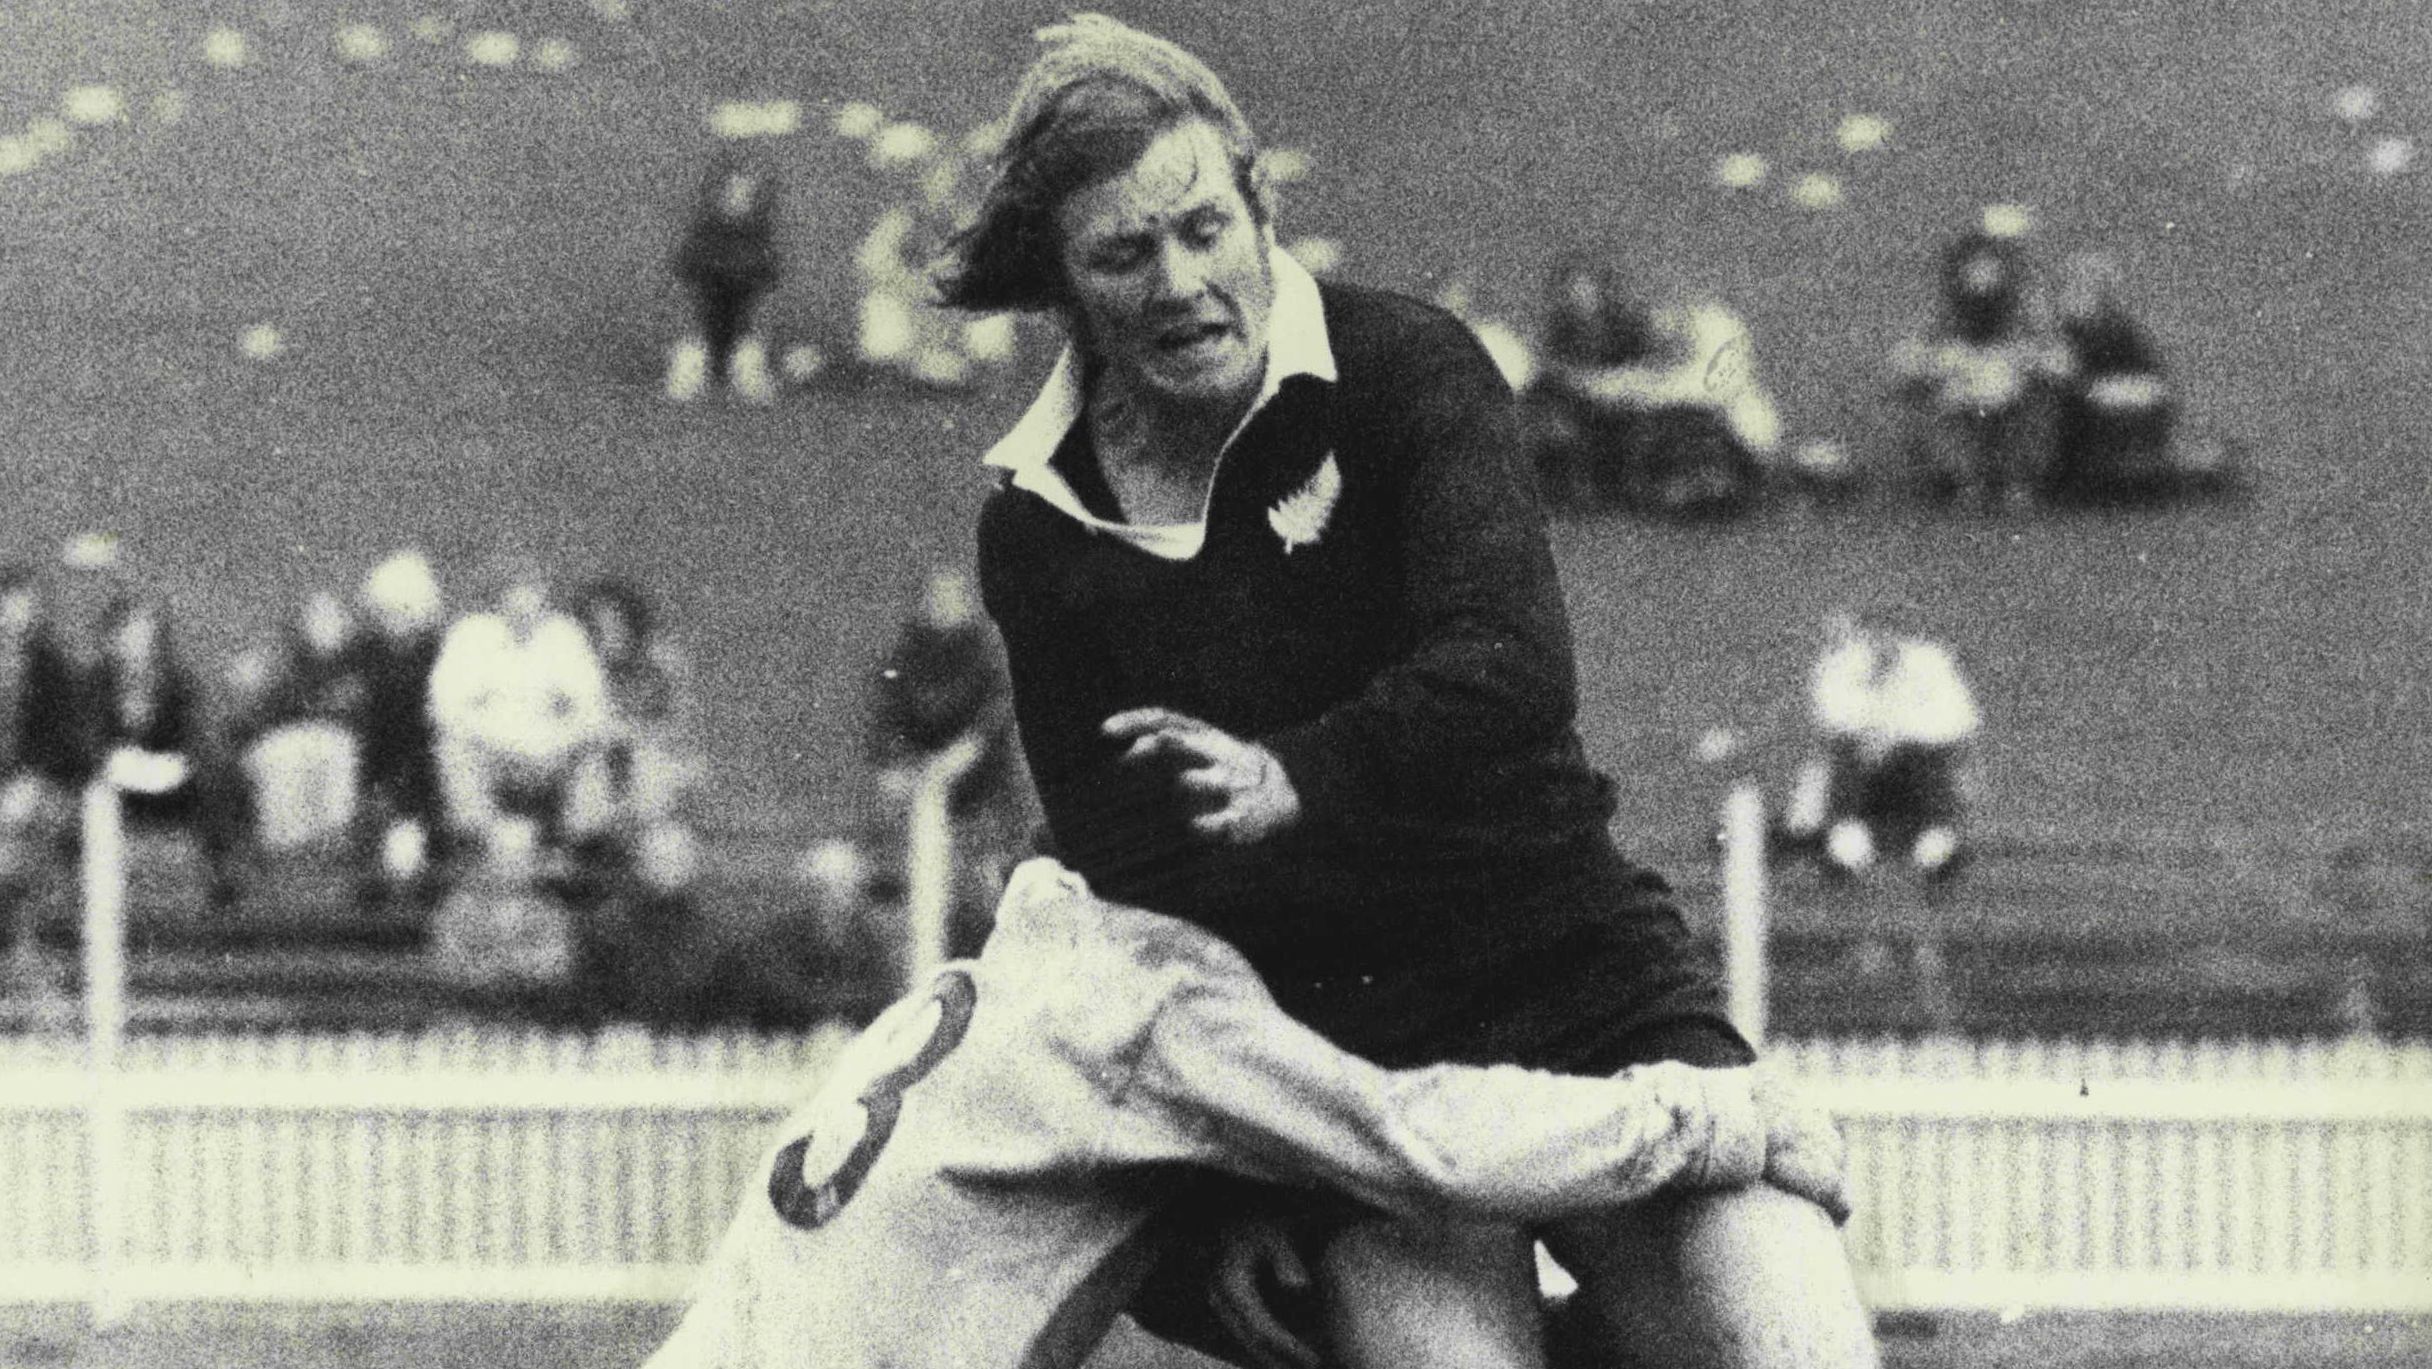 NSW centre John Wetherstone makes an effective tackle of his opposite number Bruce Robertson in the NSW vs All Blacks game on May 18, 1974.